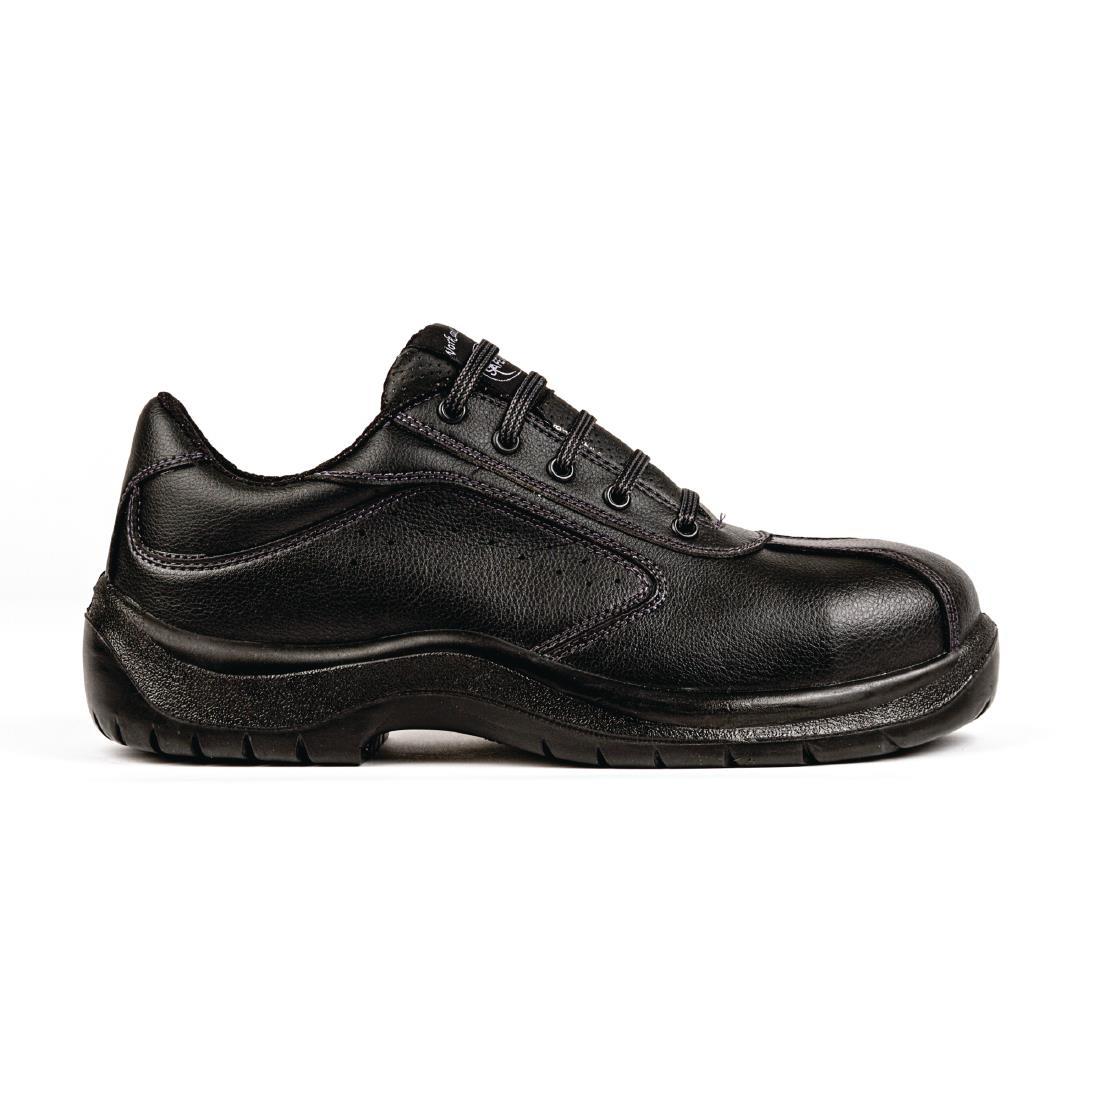 Slipbuster Side Perforated Lace Up Black 39